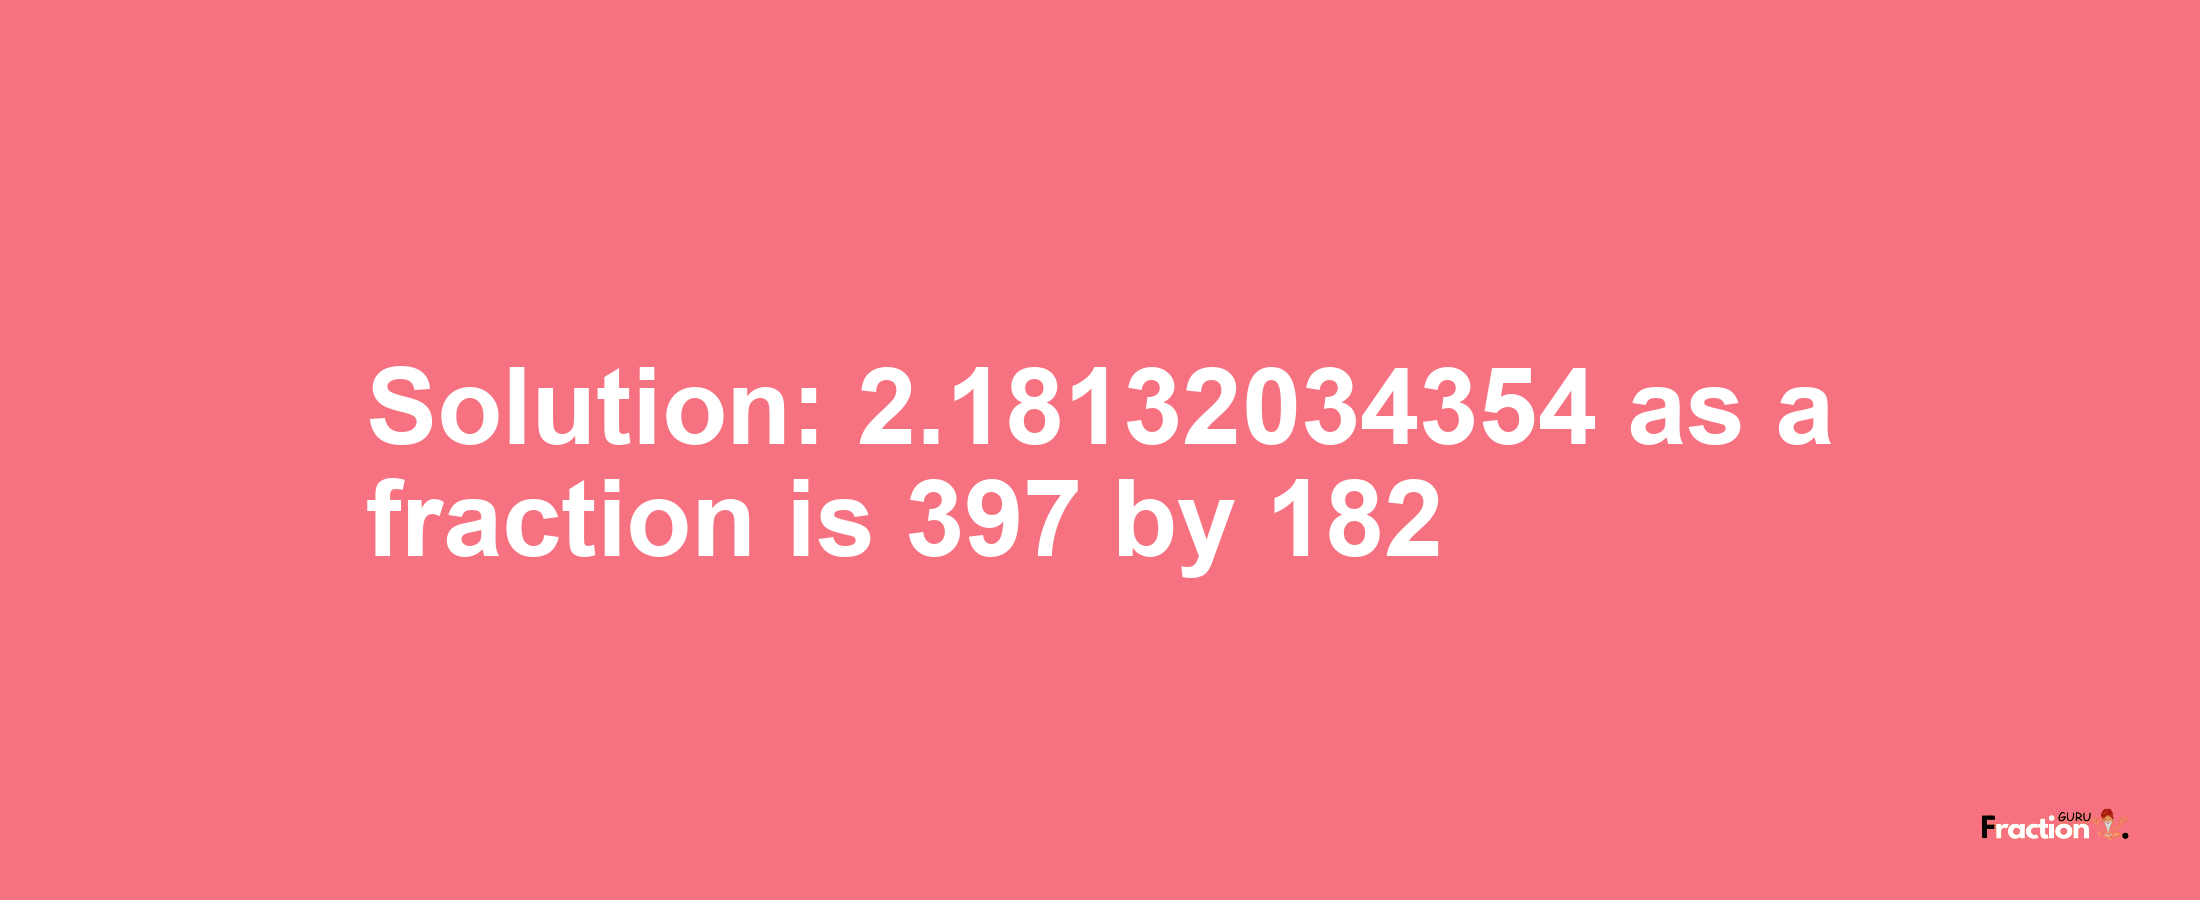 Solution:2.18132034354 as a fraction is 397/182